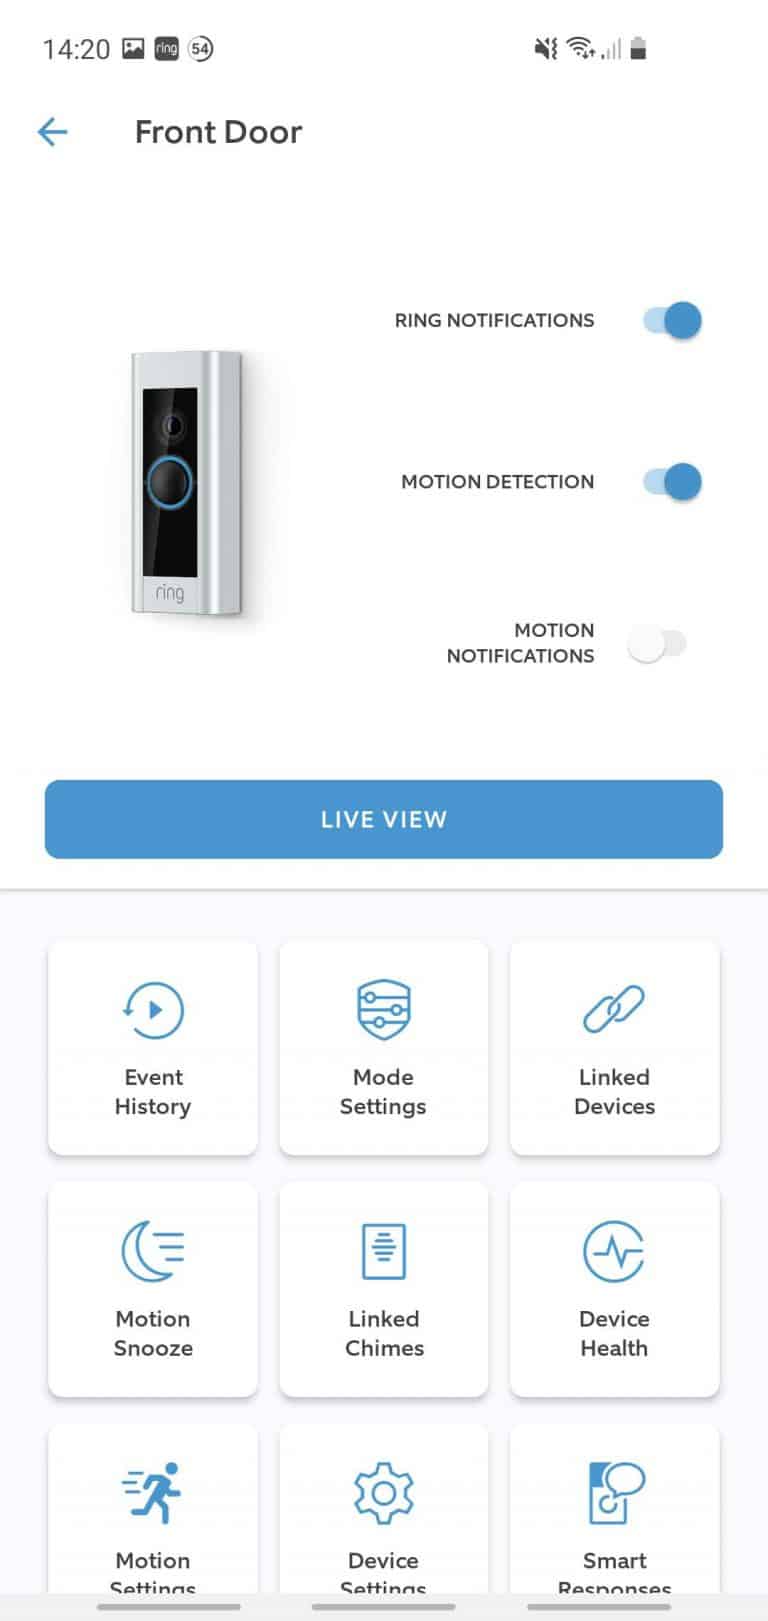 The Ring App showing various settings and options for the Ring Doorbell Pro including motion and recording settings